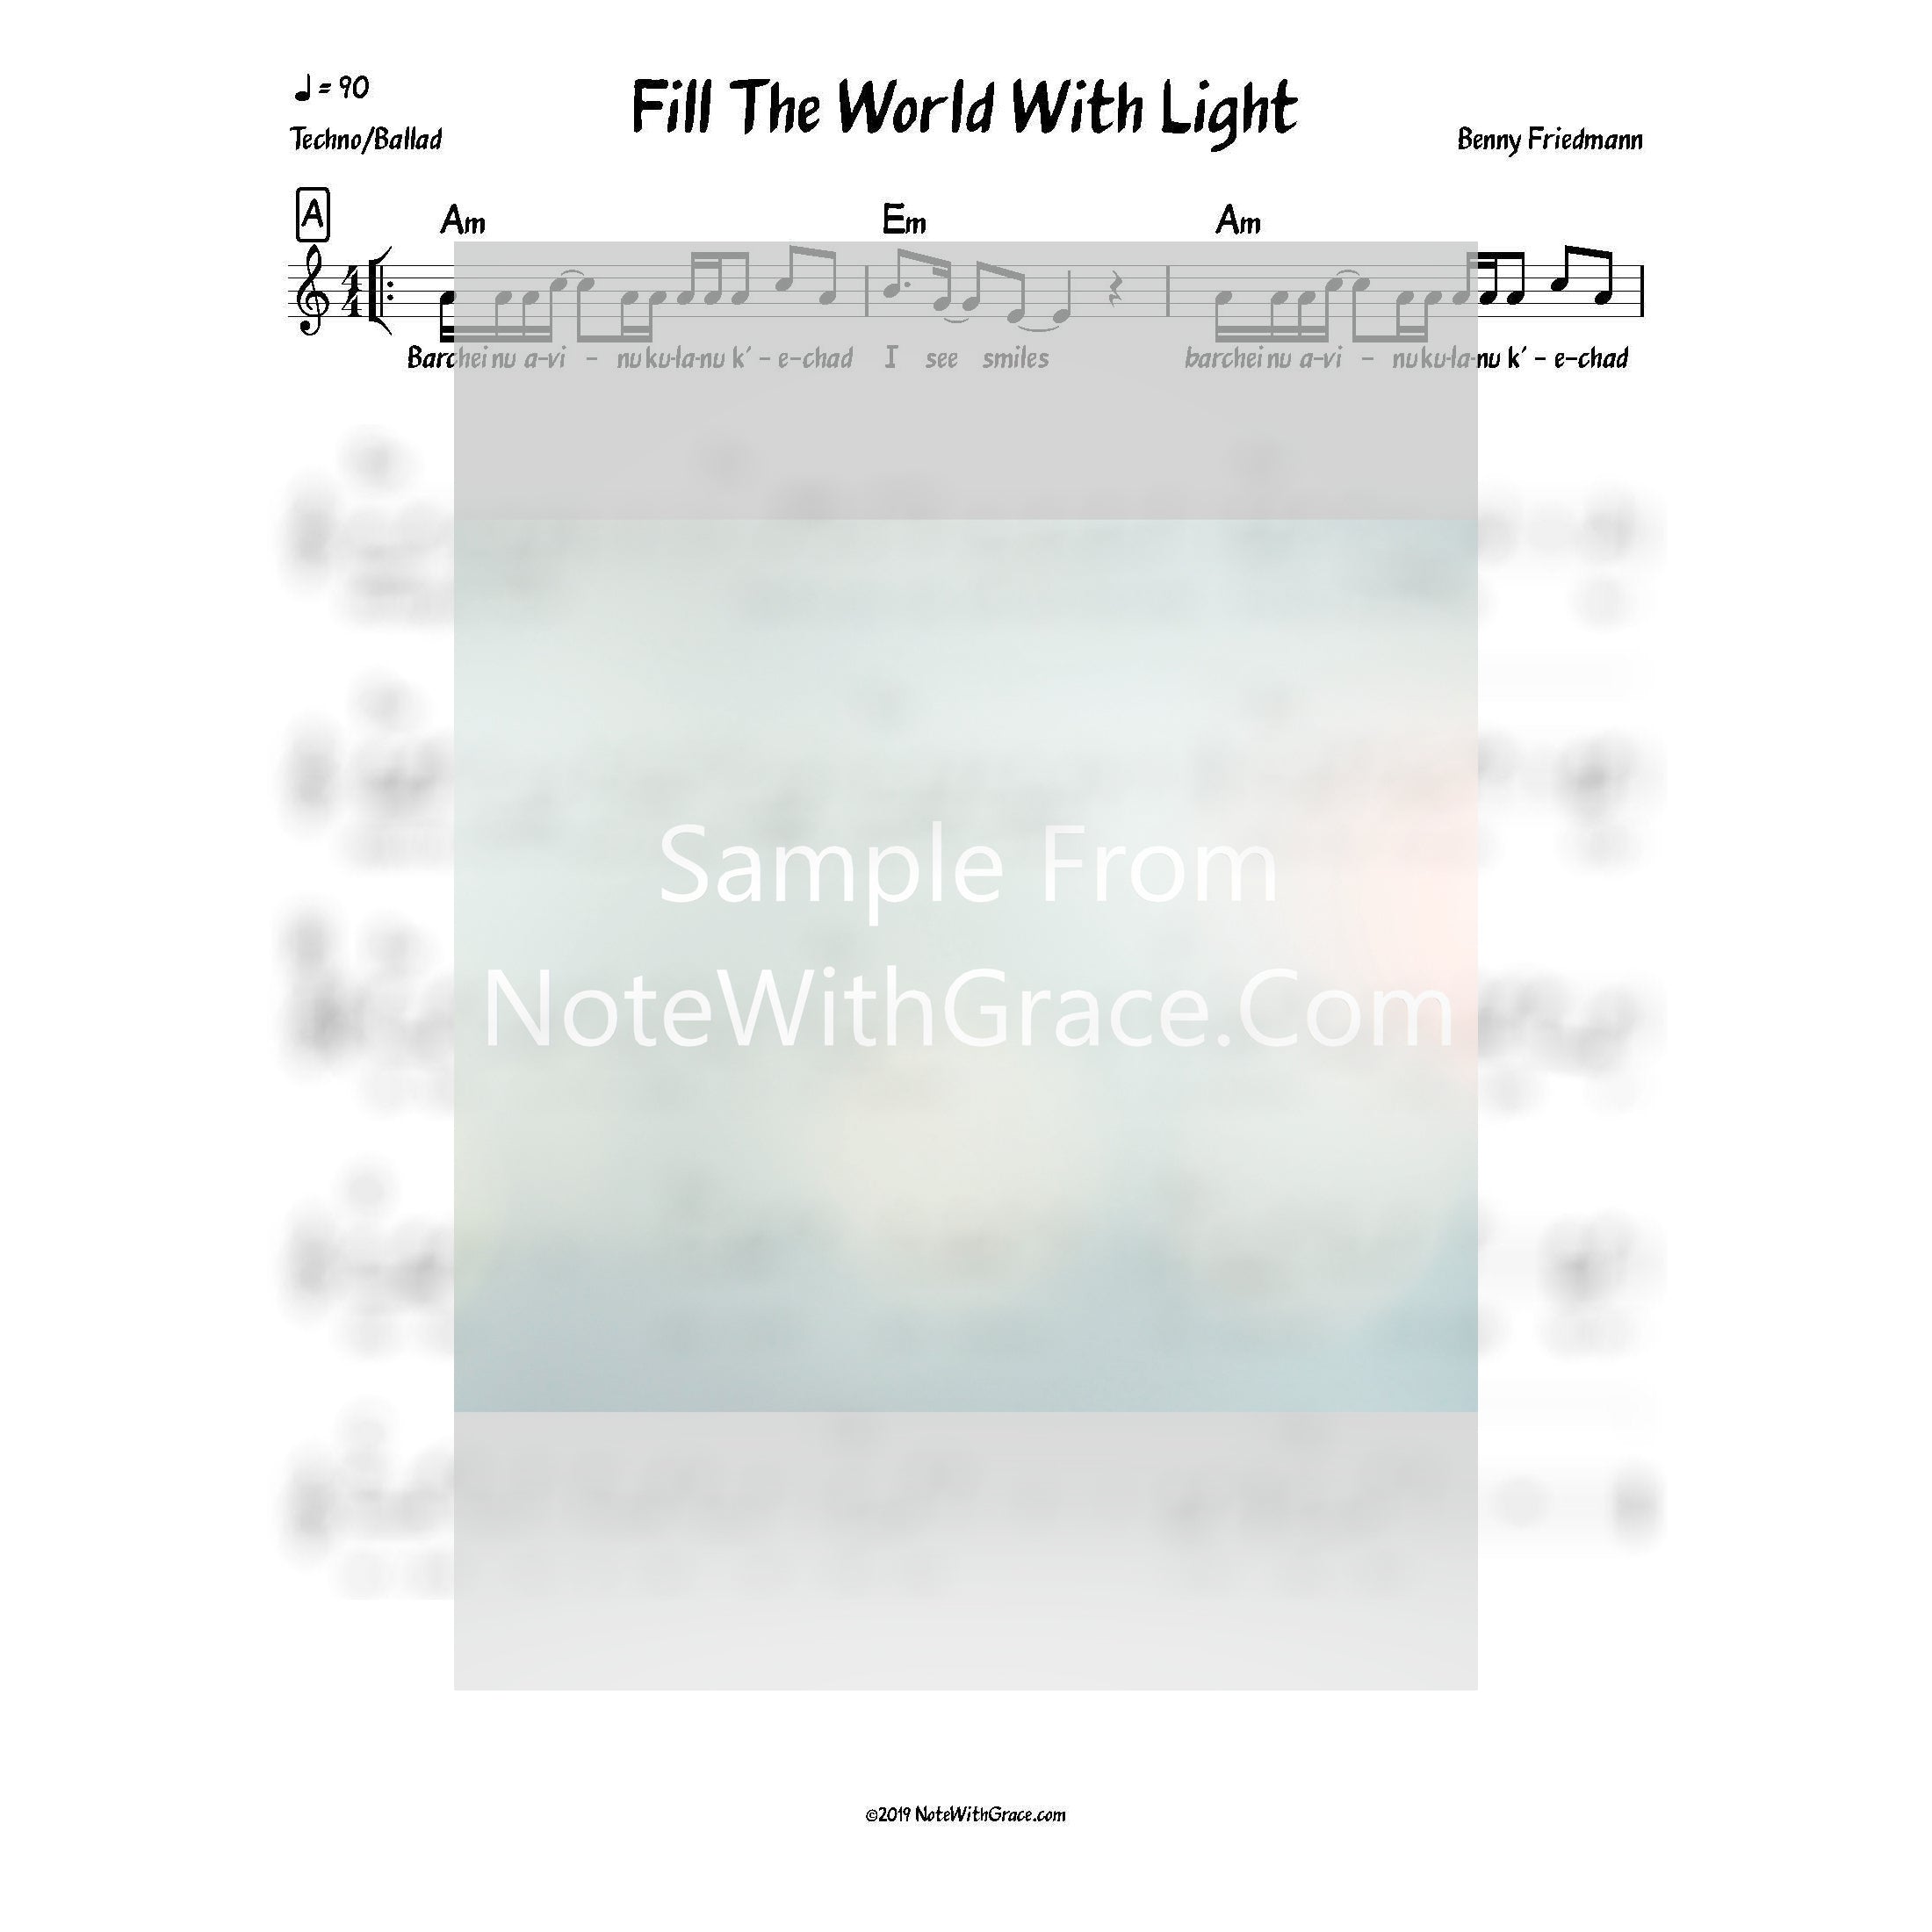 Fill The World With Light Lead Sheet (Benny Friedman) Album Fill The World With Light 2016-Sheet music-NoteWithGrace.com